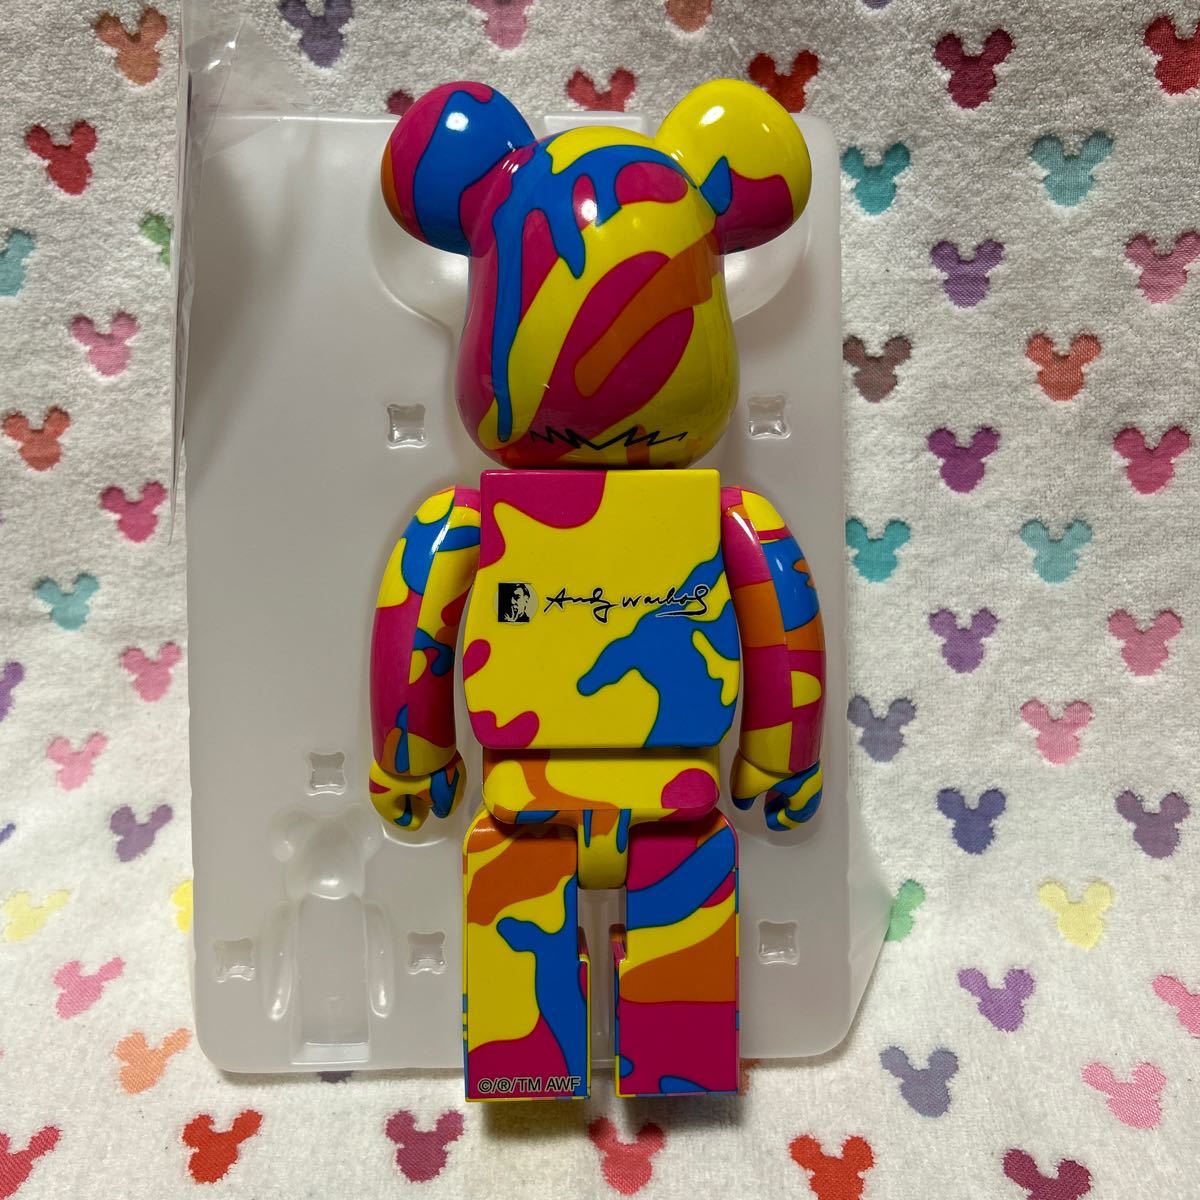 BE@RBRICK ANDY WARHOL SPECIAL 400% 未使用　ベアブリック アンディーウォーホル_画像3